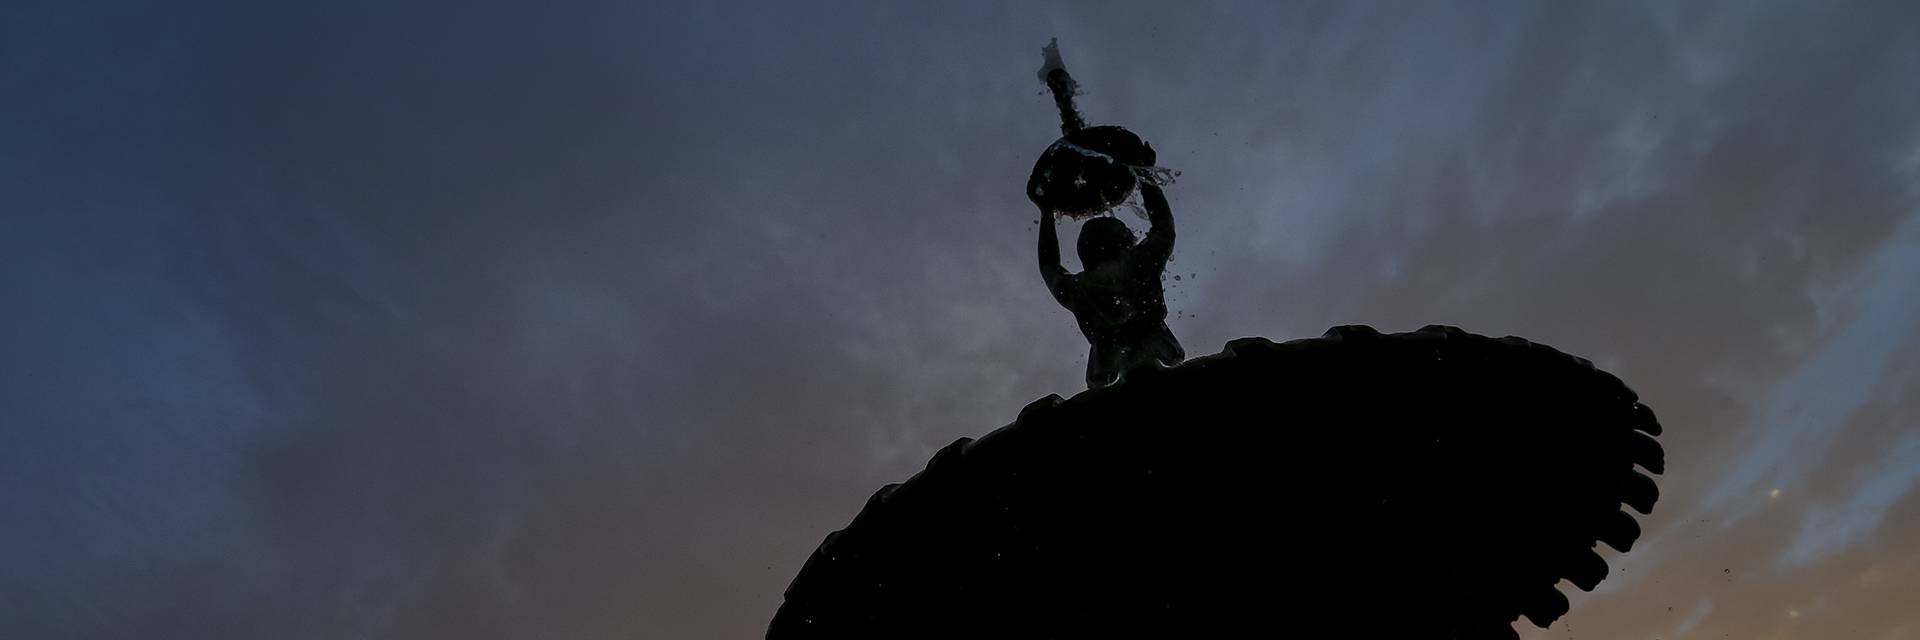 image of twilight sky and silhouette of Adelphi fountain on UND's campus.